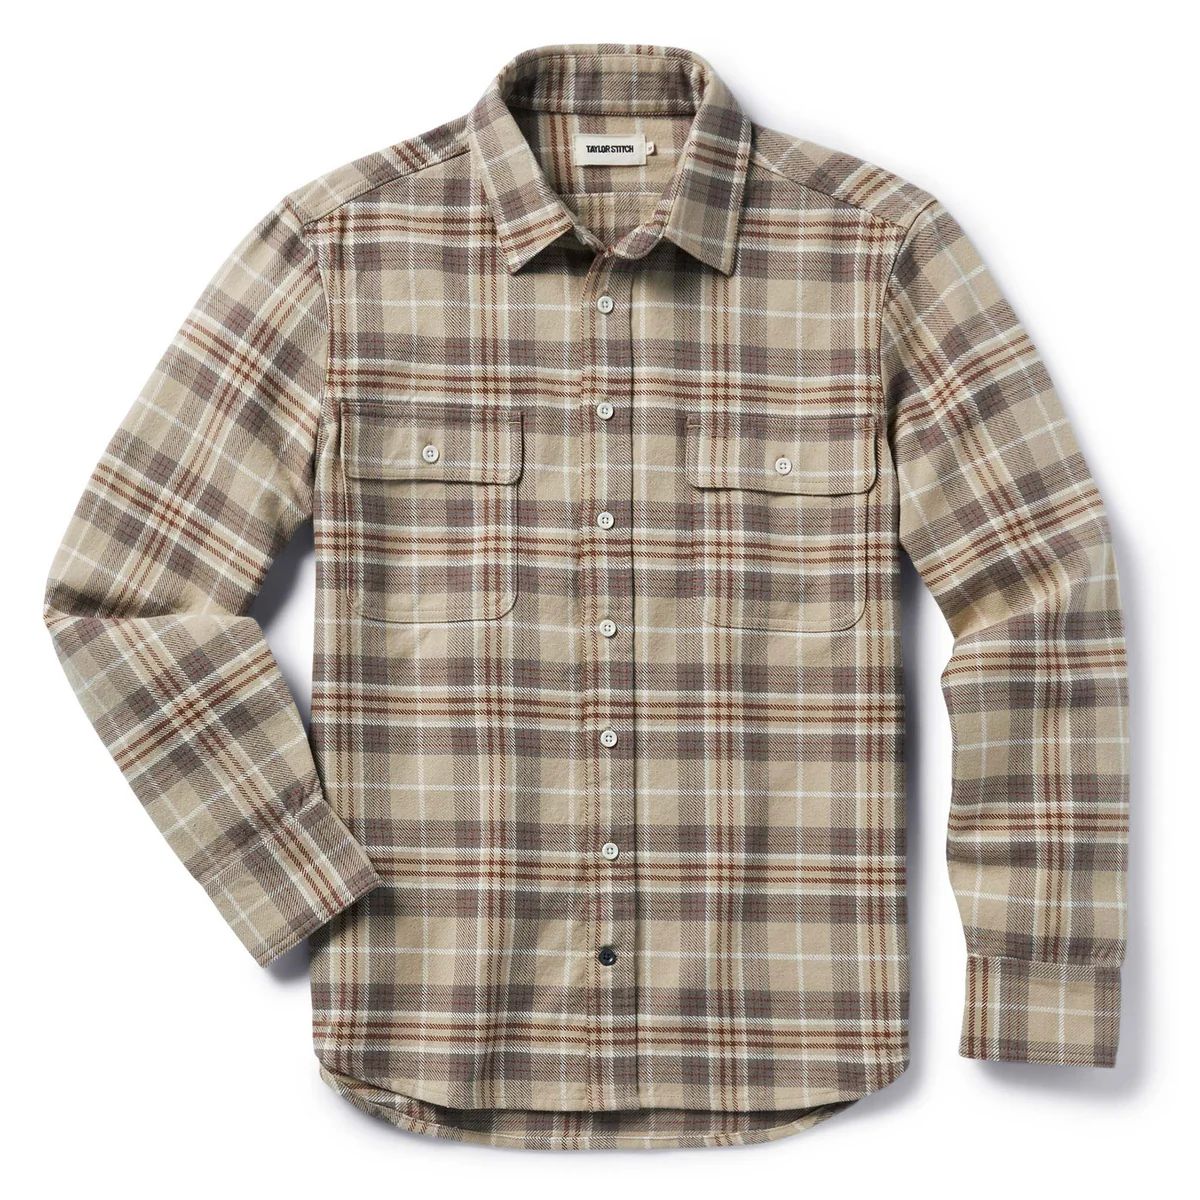 The Ledge Shirt in Fossil Plaid | Taylor Stitch